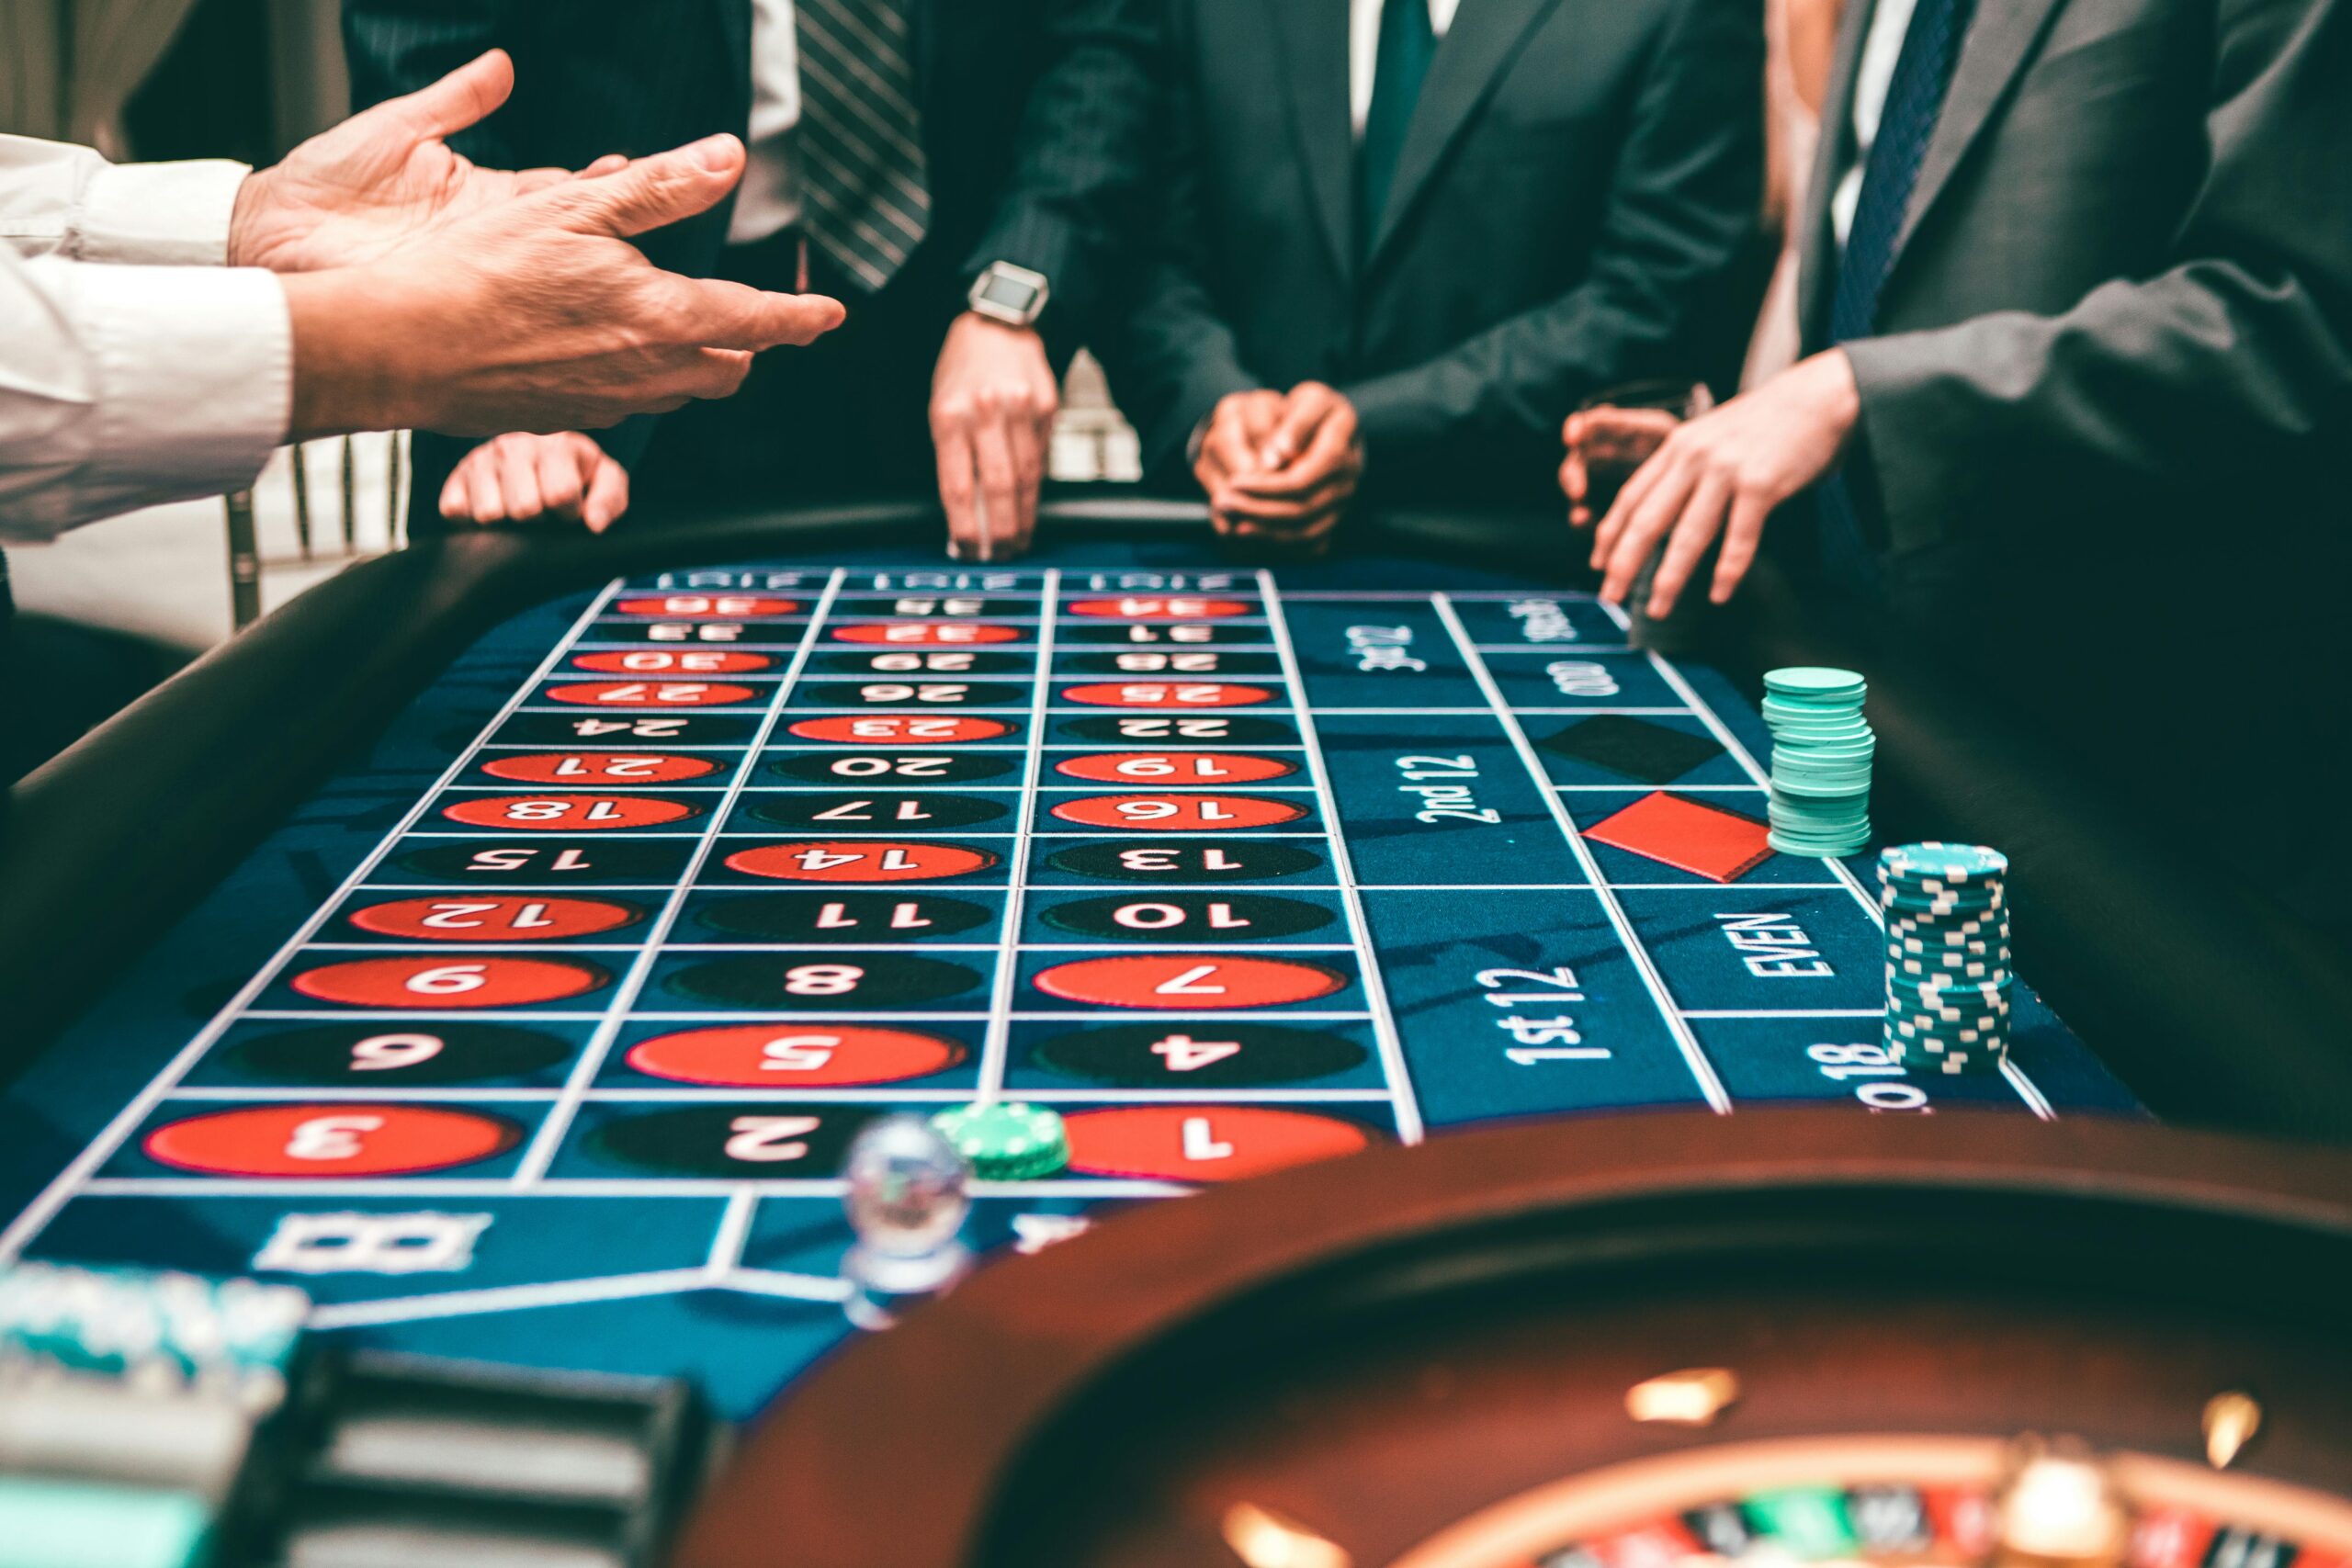 7 Tips for Taking Advantage of Online Casino Welcome Bonuses